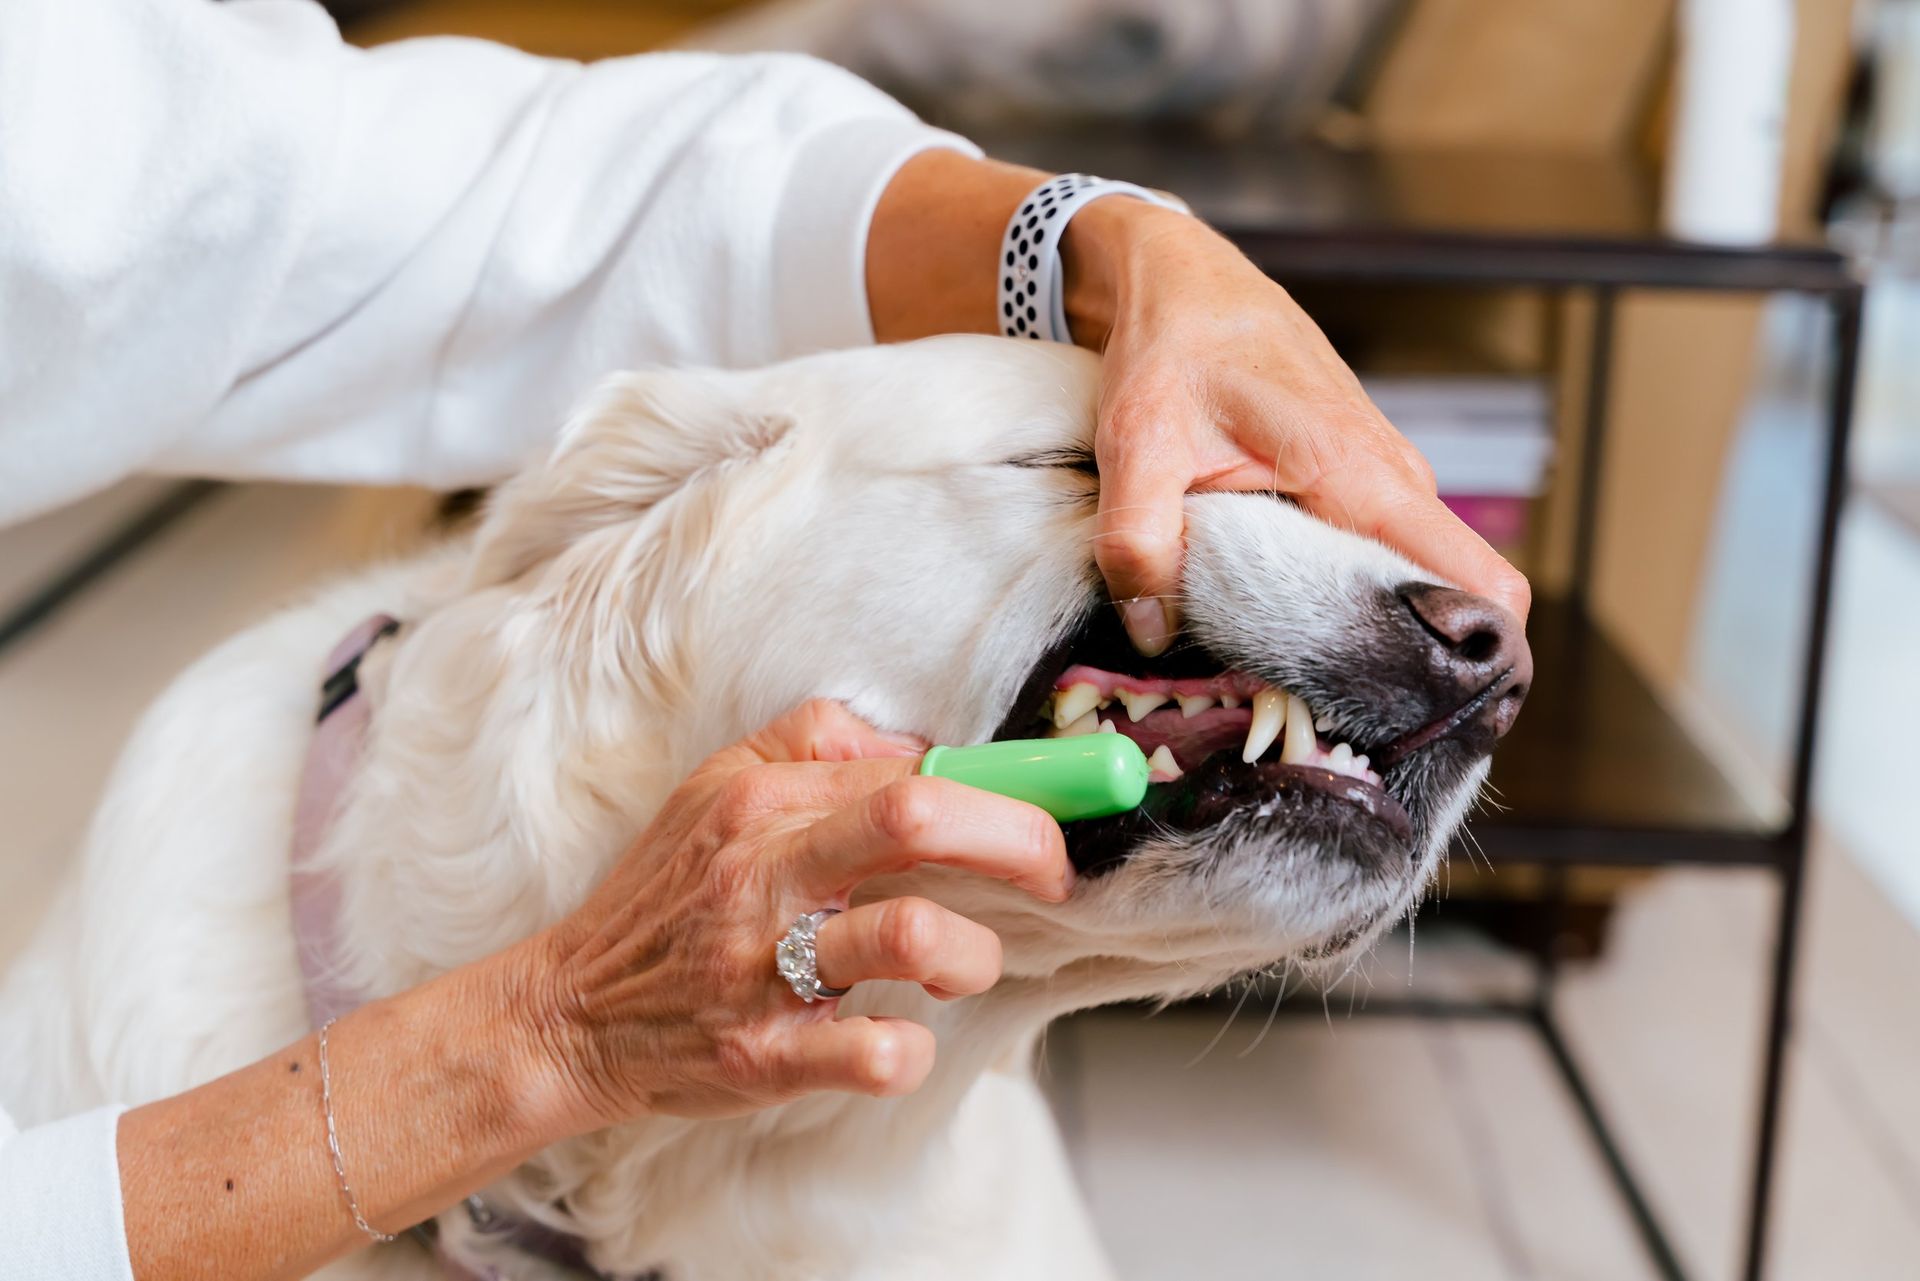 a woman is brushing a dog 's teeth with a green toothbrush .